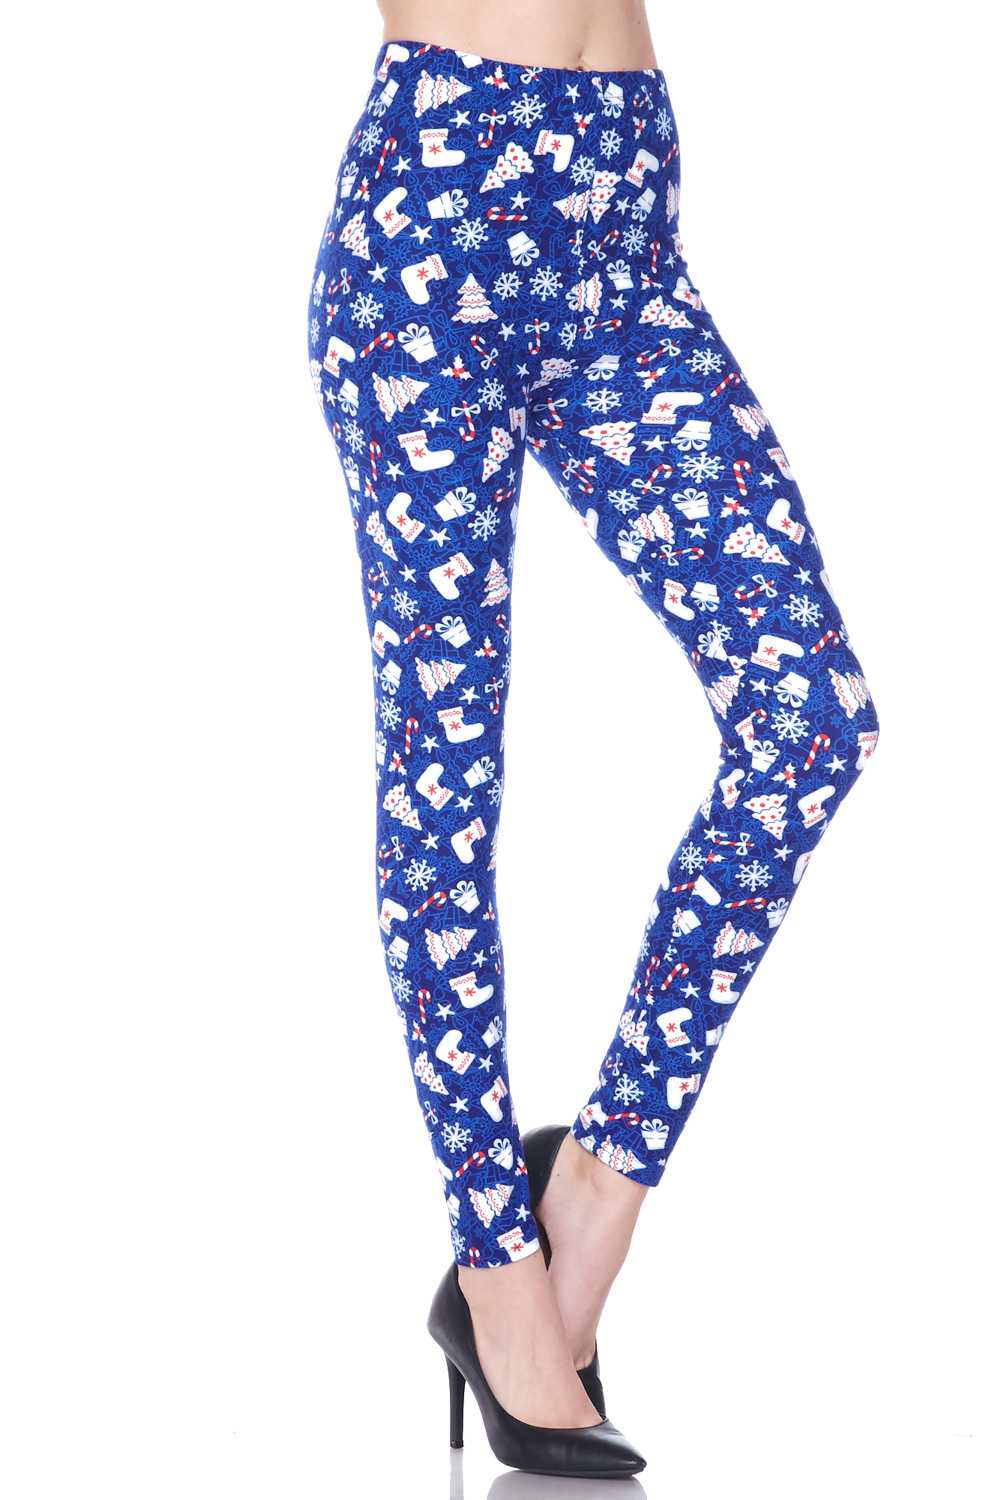 Snow Flakes And Gifts X-Mas Print Brushed Leggings - 4